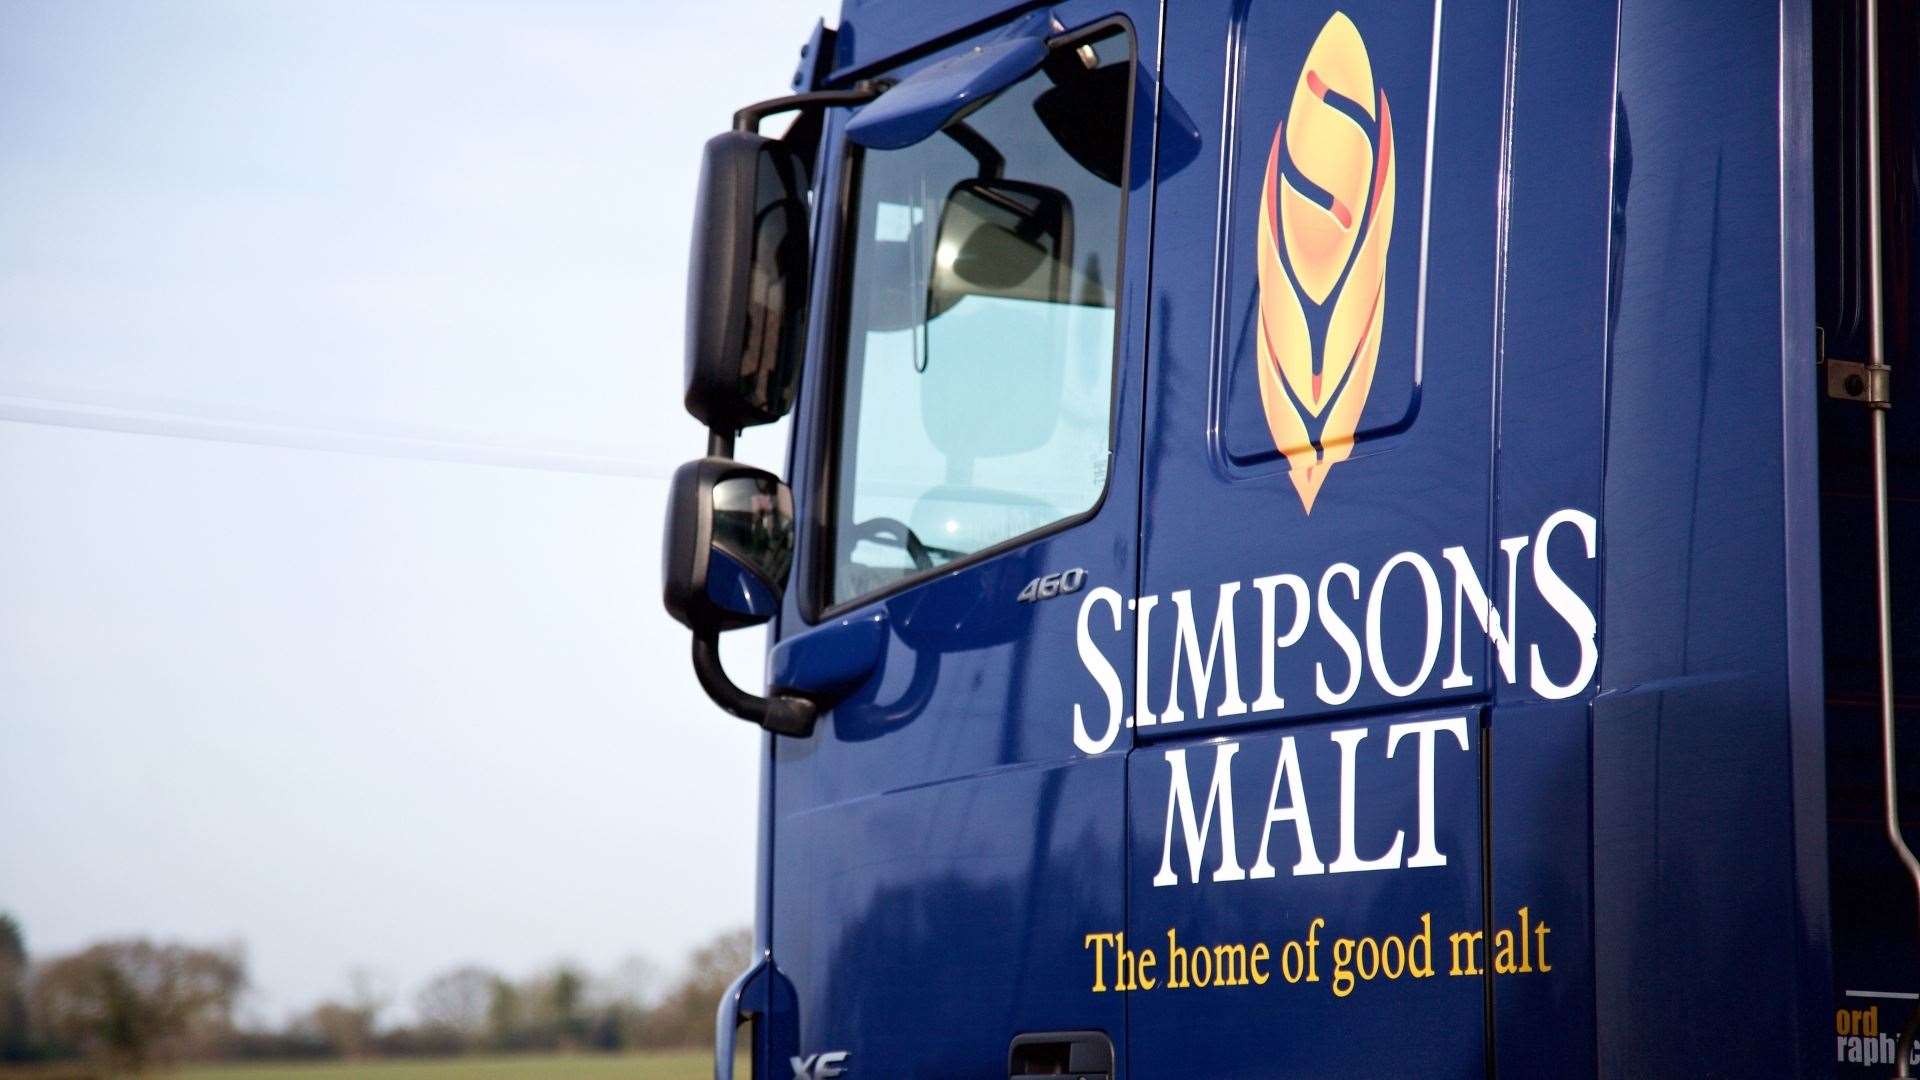 Simpsons Malt hopes to build a maltings and malting barley storage facilities on land near Rothes.